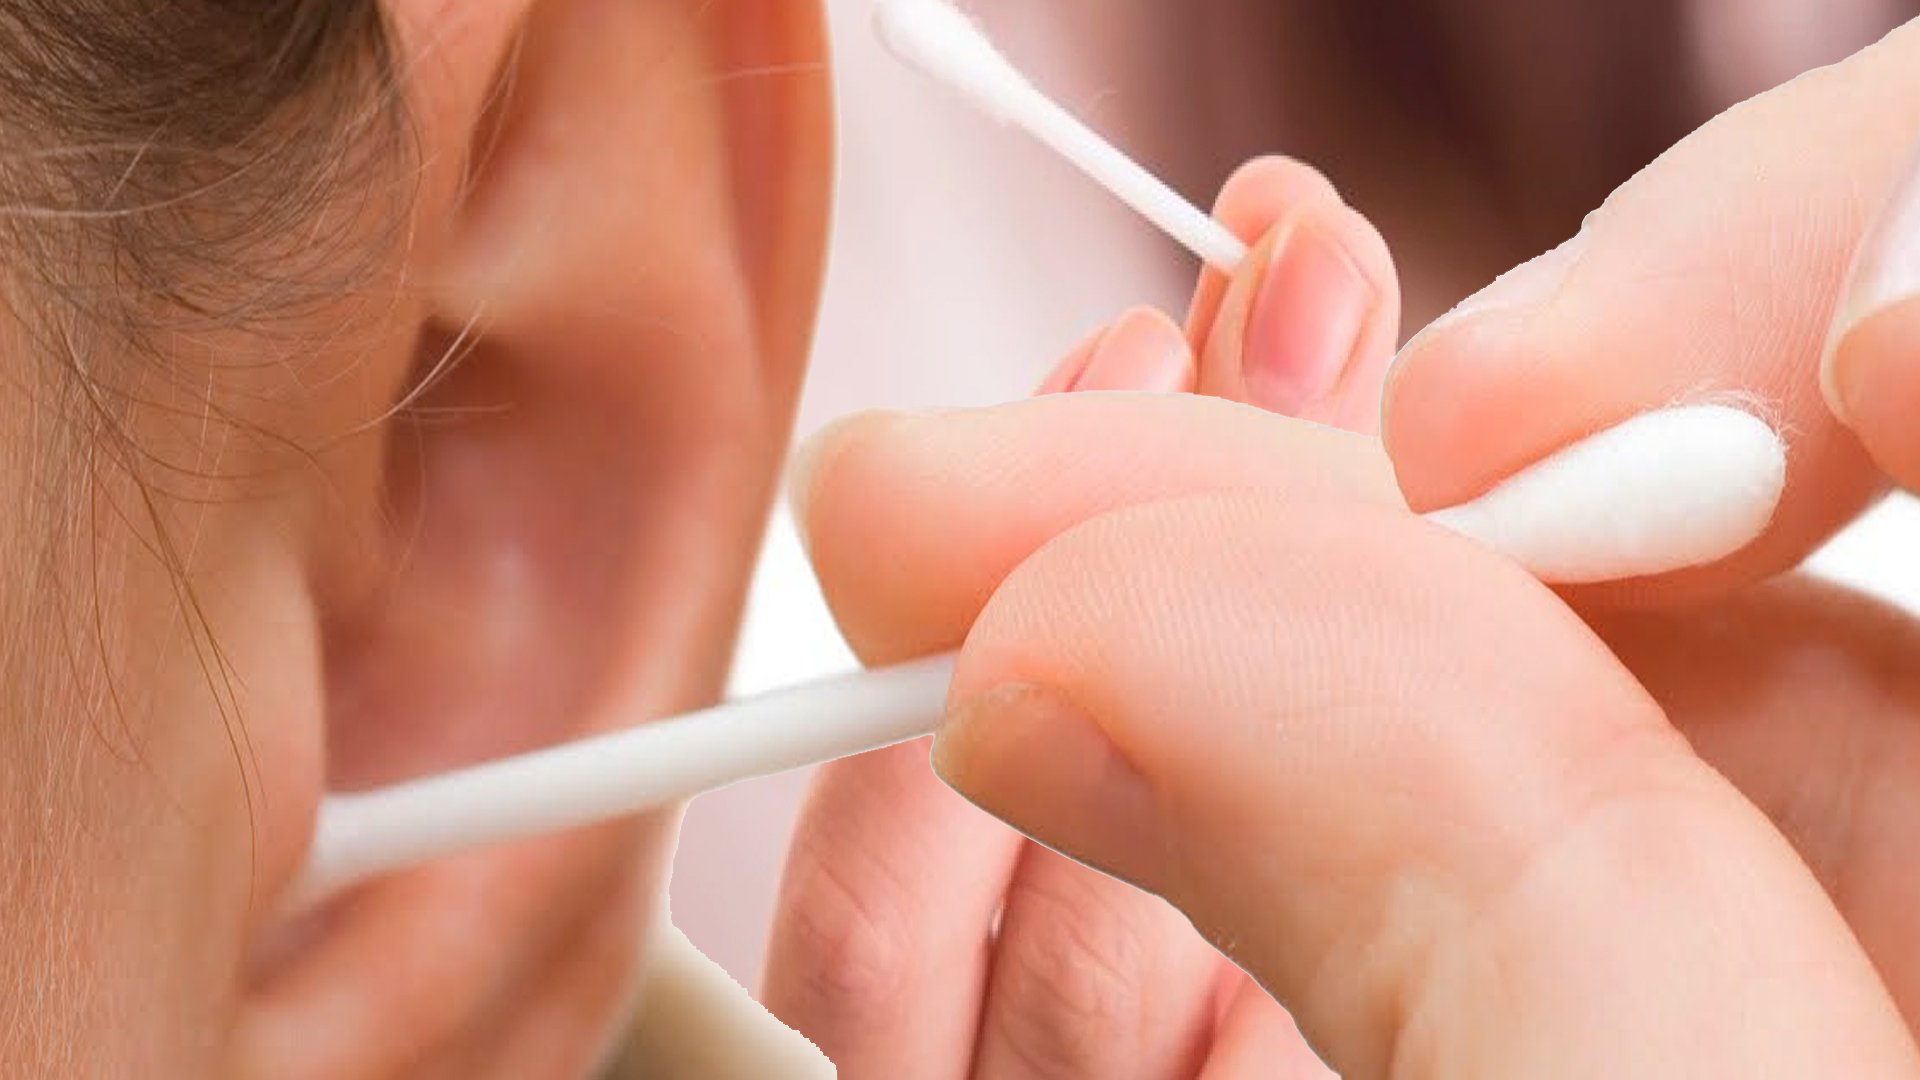 Few Tips For Cleaning Your Ears Safely  Top Natural Remedy